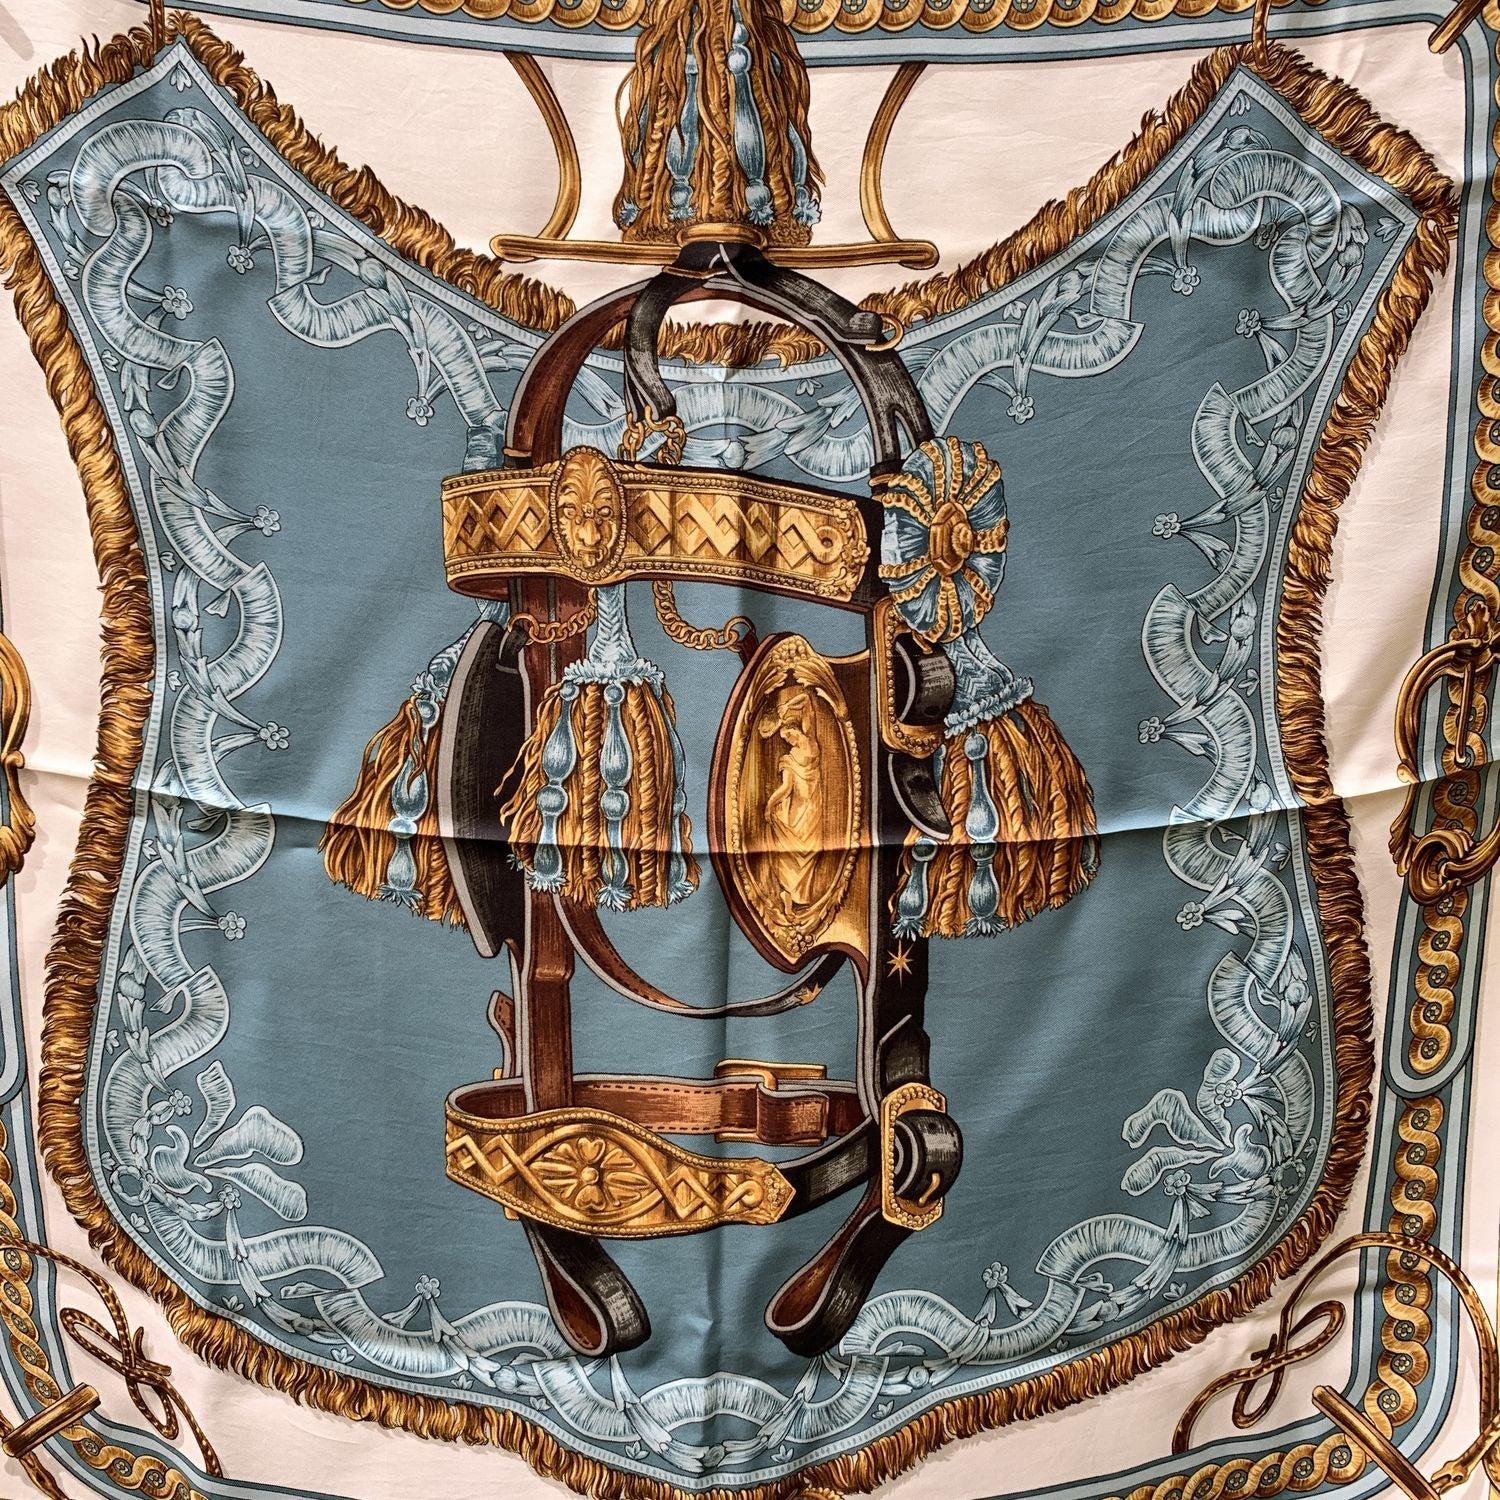 HERMES silk scarf named Bride de Cour . Designed by Françoise de la Perriere in 1969. It was re issued many times in different colors, types and sizes. Hand rolled edges . Measurements: Approx 35 x 35 inches. 'HERMES PARIS' printed in the lower